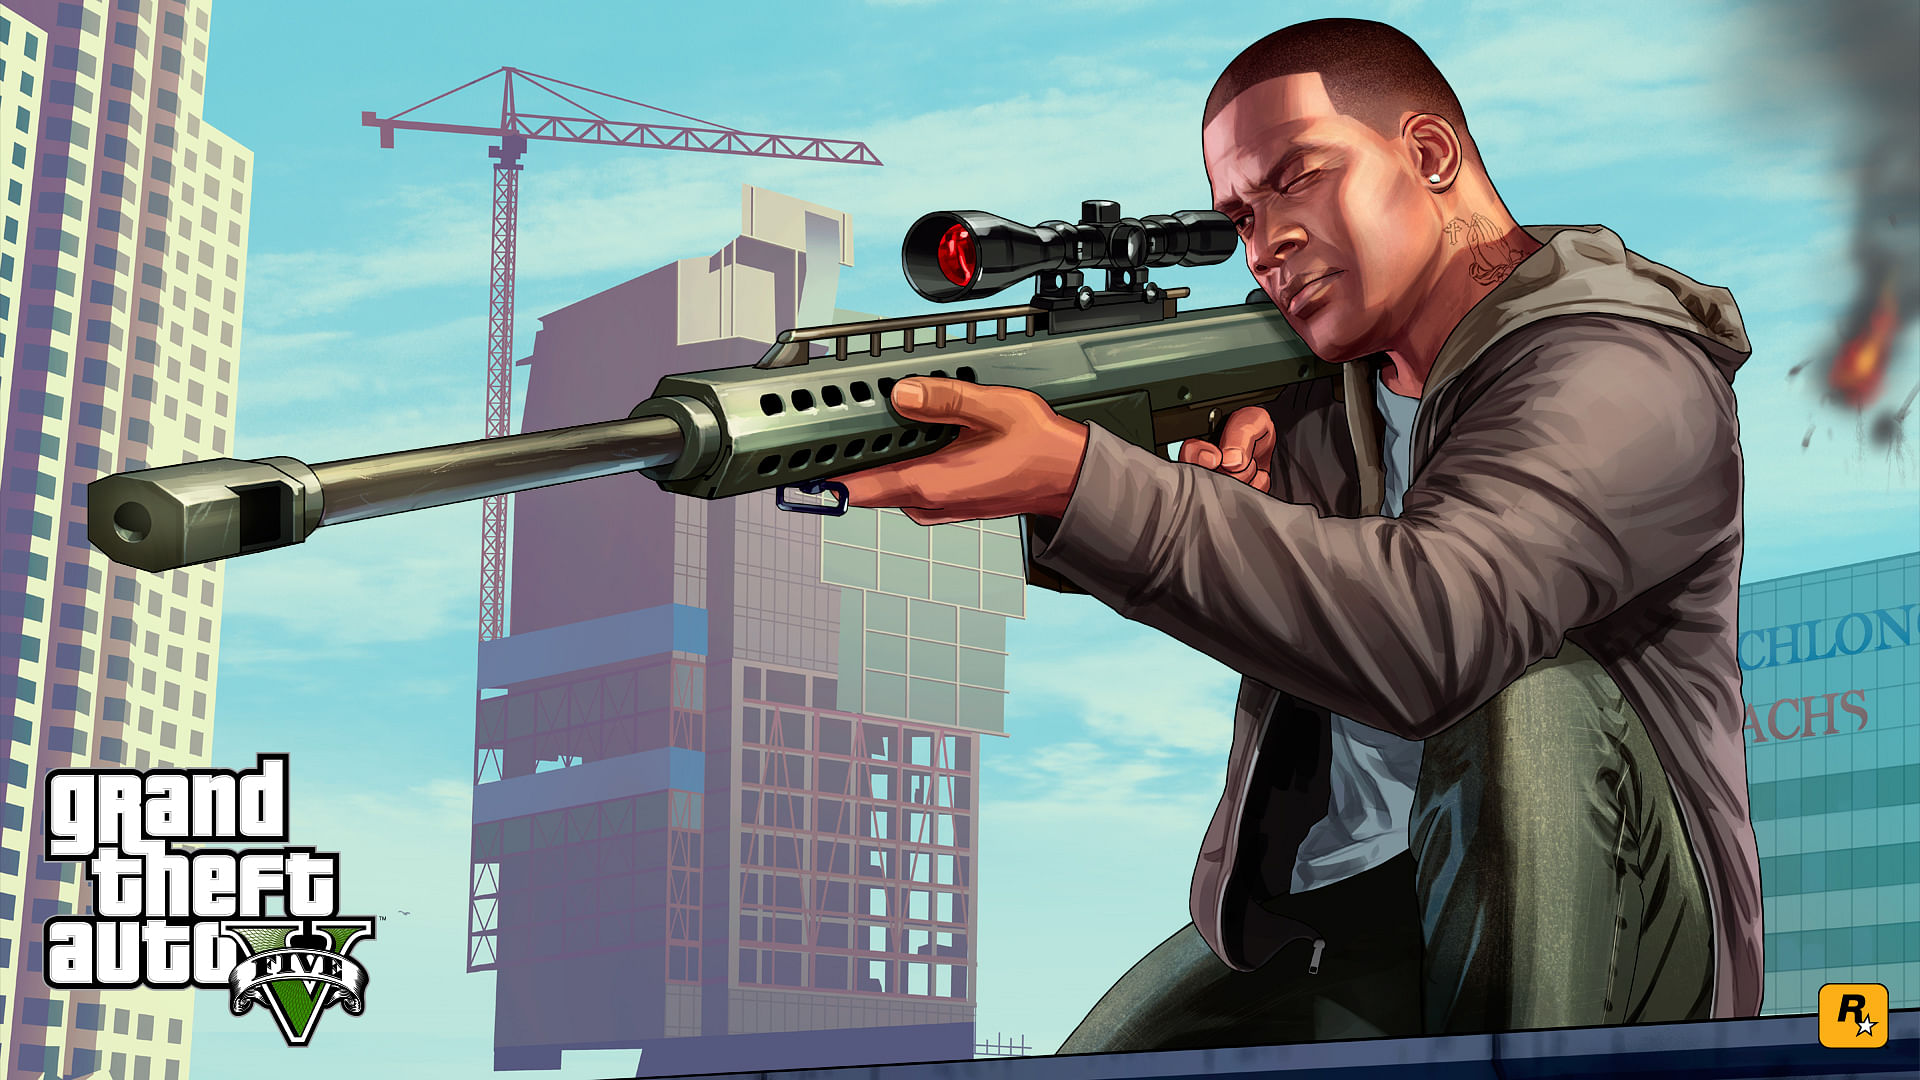 Grand Theft Auto V: Cheats for PS3, PS4, Xbox 360 and Xbox One